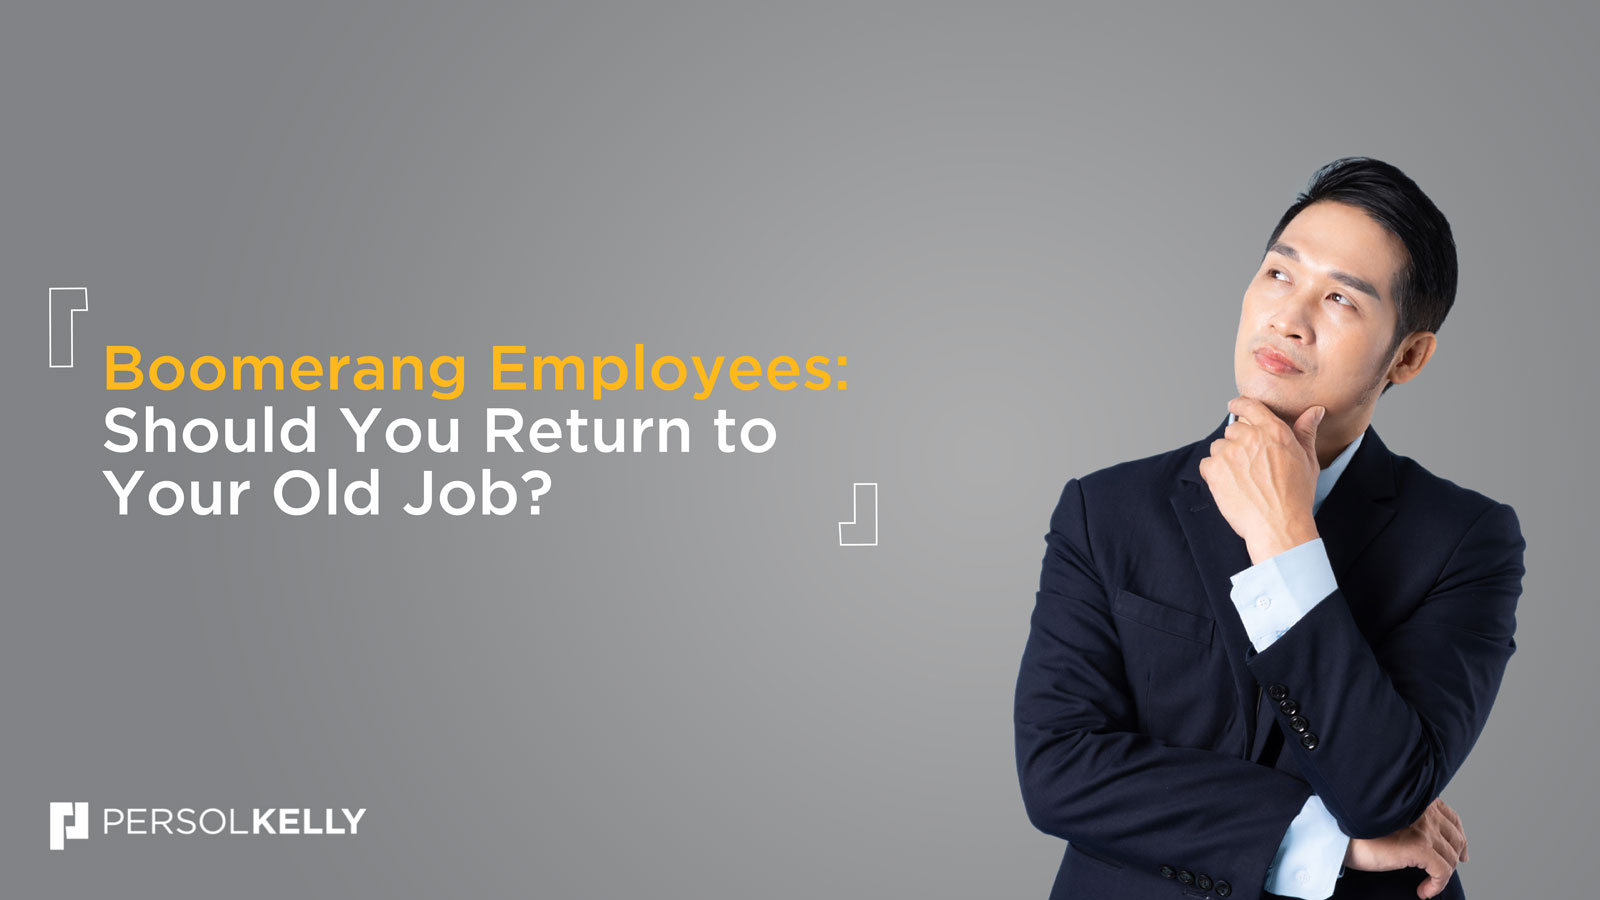 Boomerang Employees: Should You Return to Your Old Job?